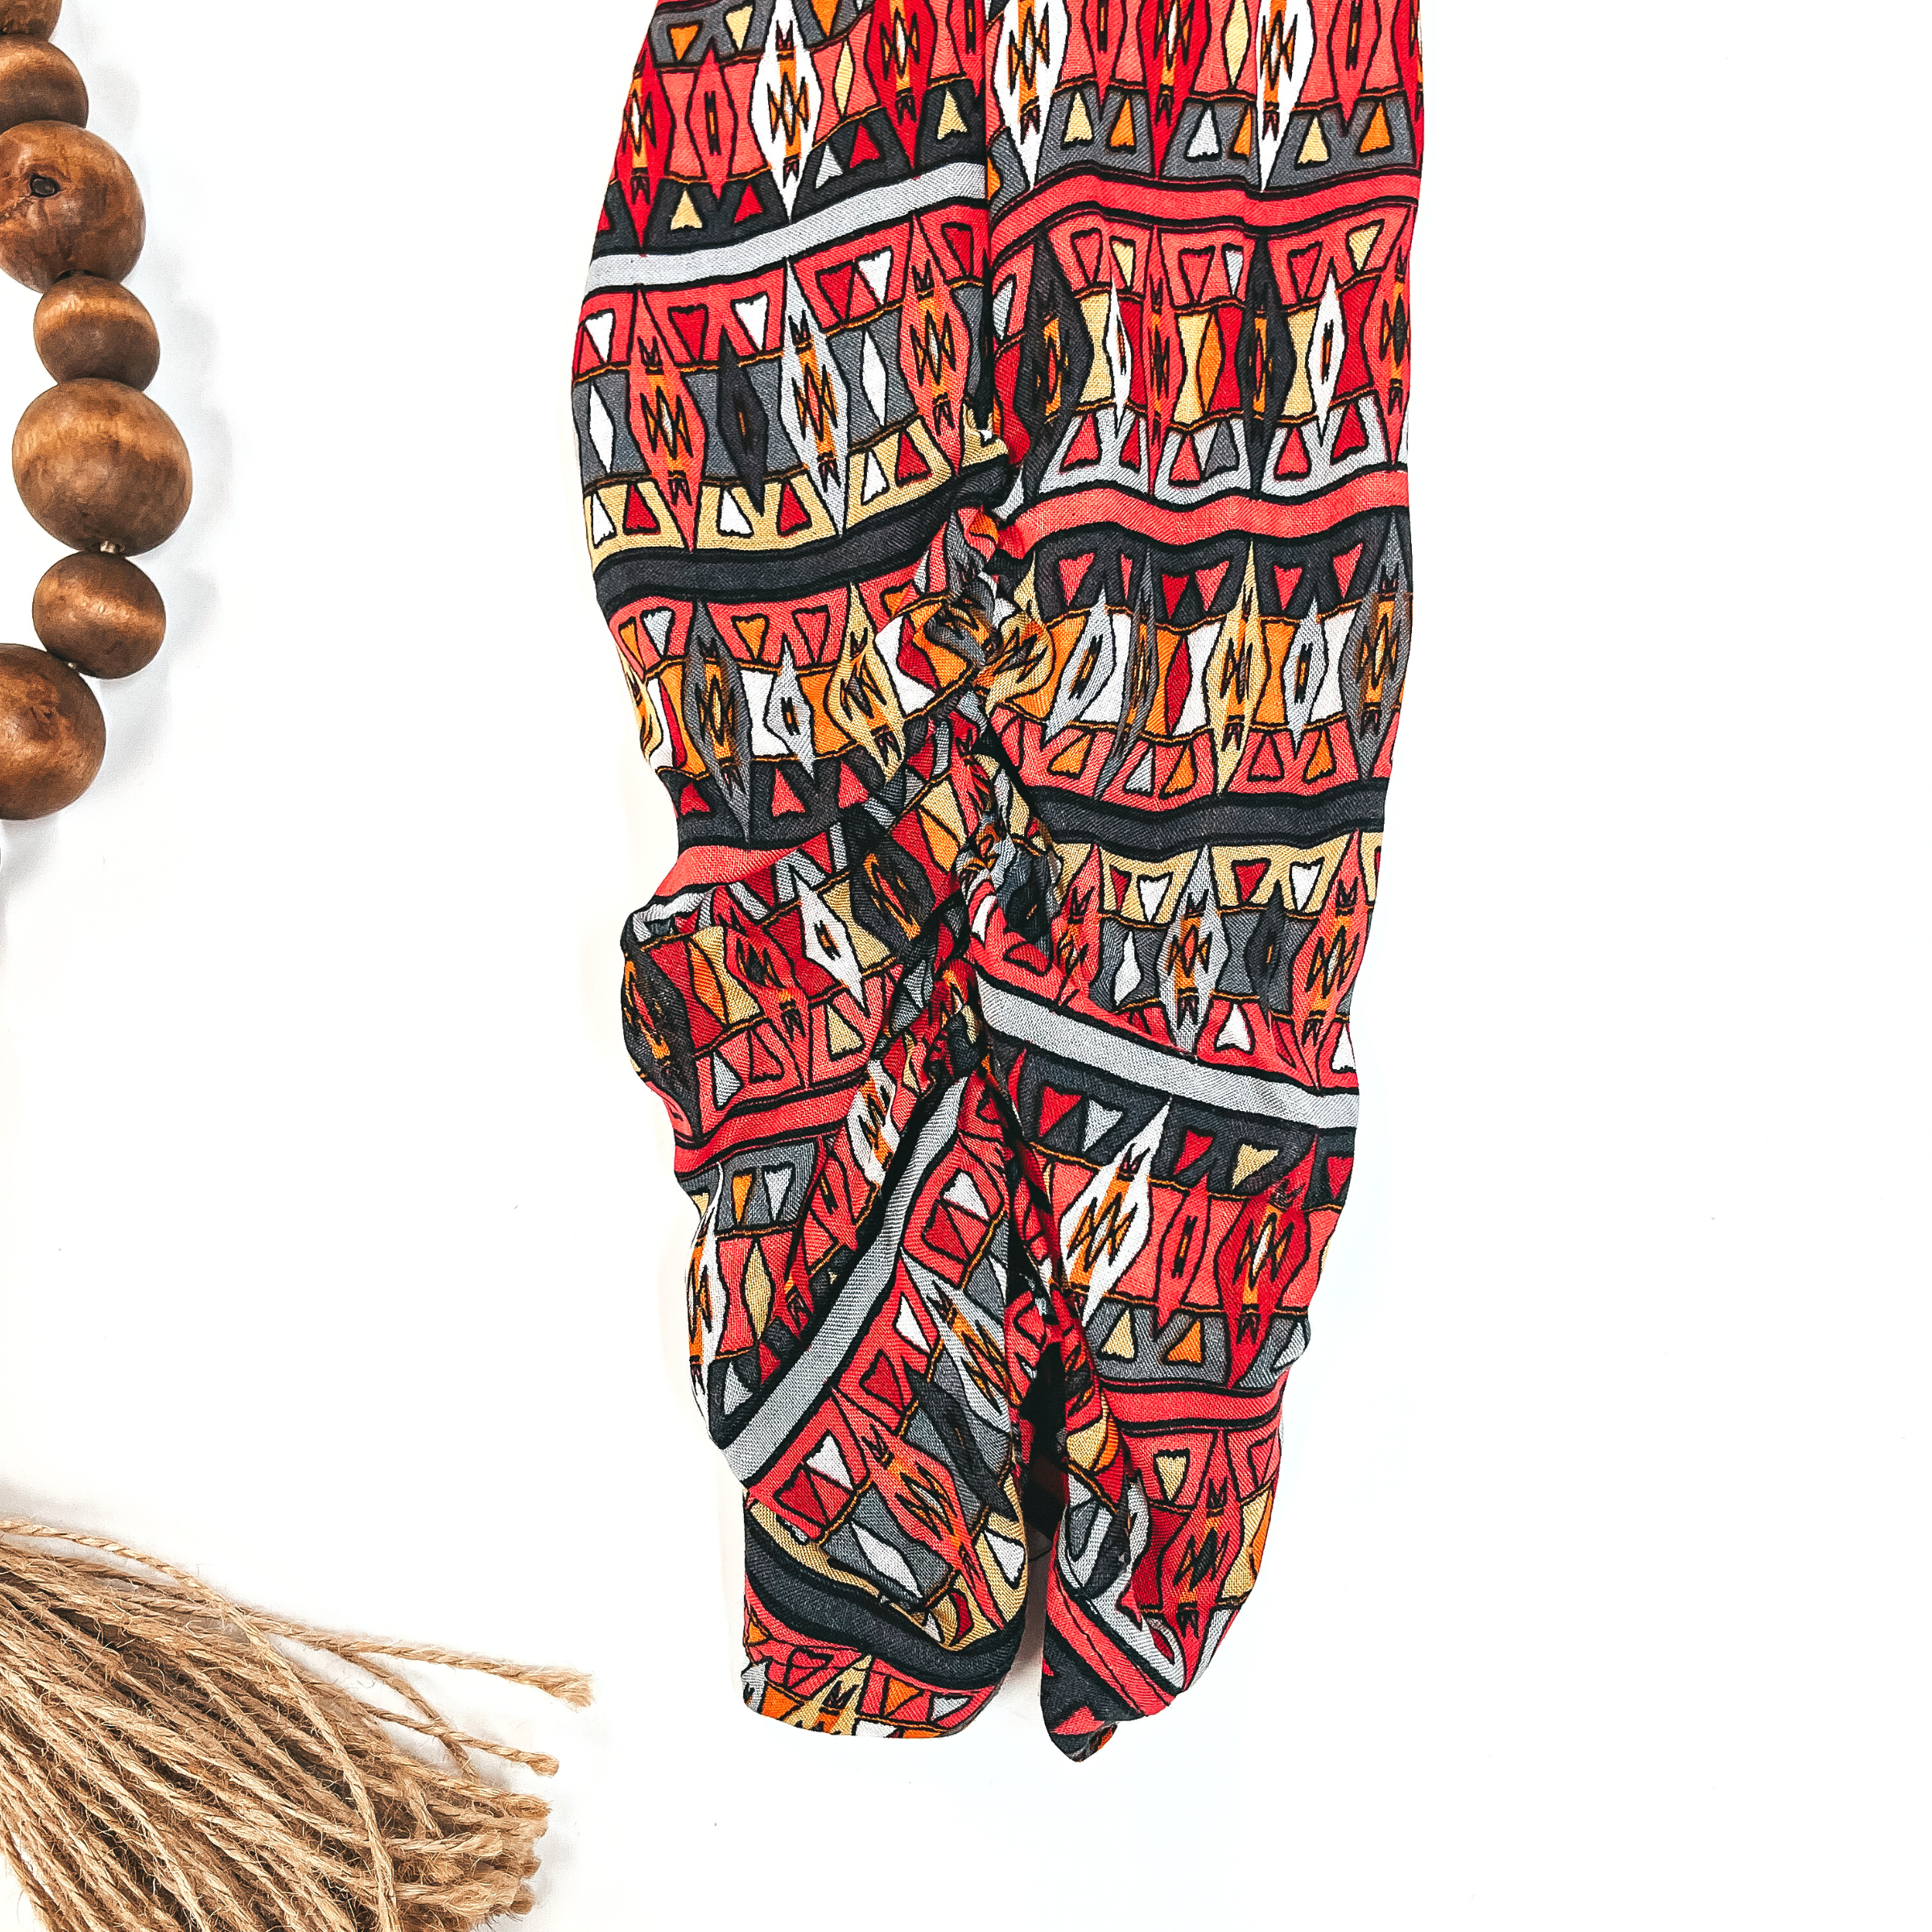 Tribal Print Pants with Ruched Bottom Sides in Red and Grey Mix - Giddy Up Glamour Boutique